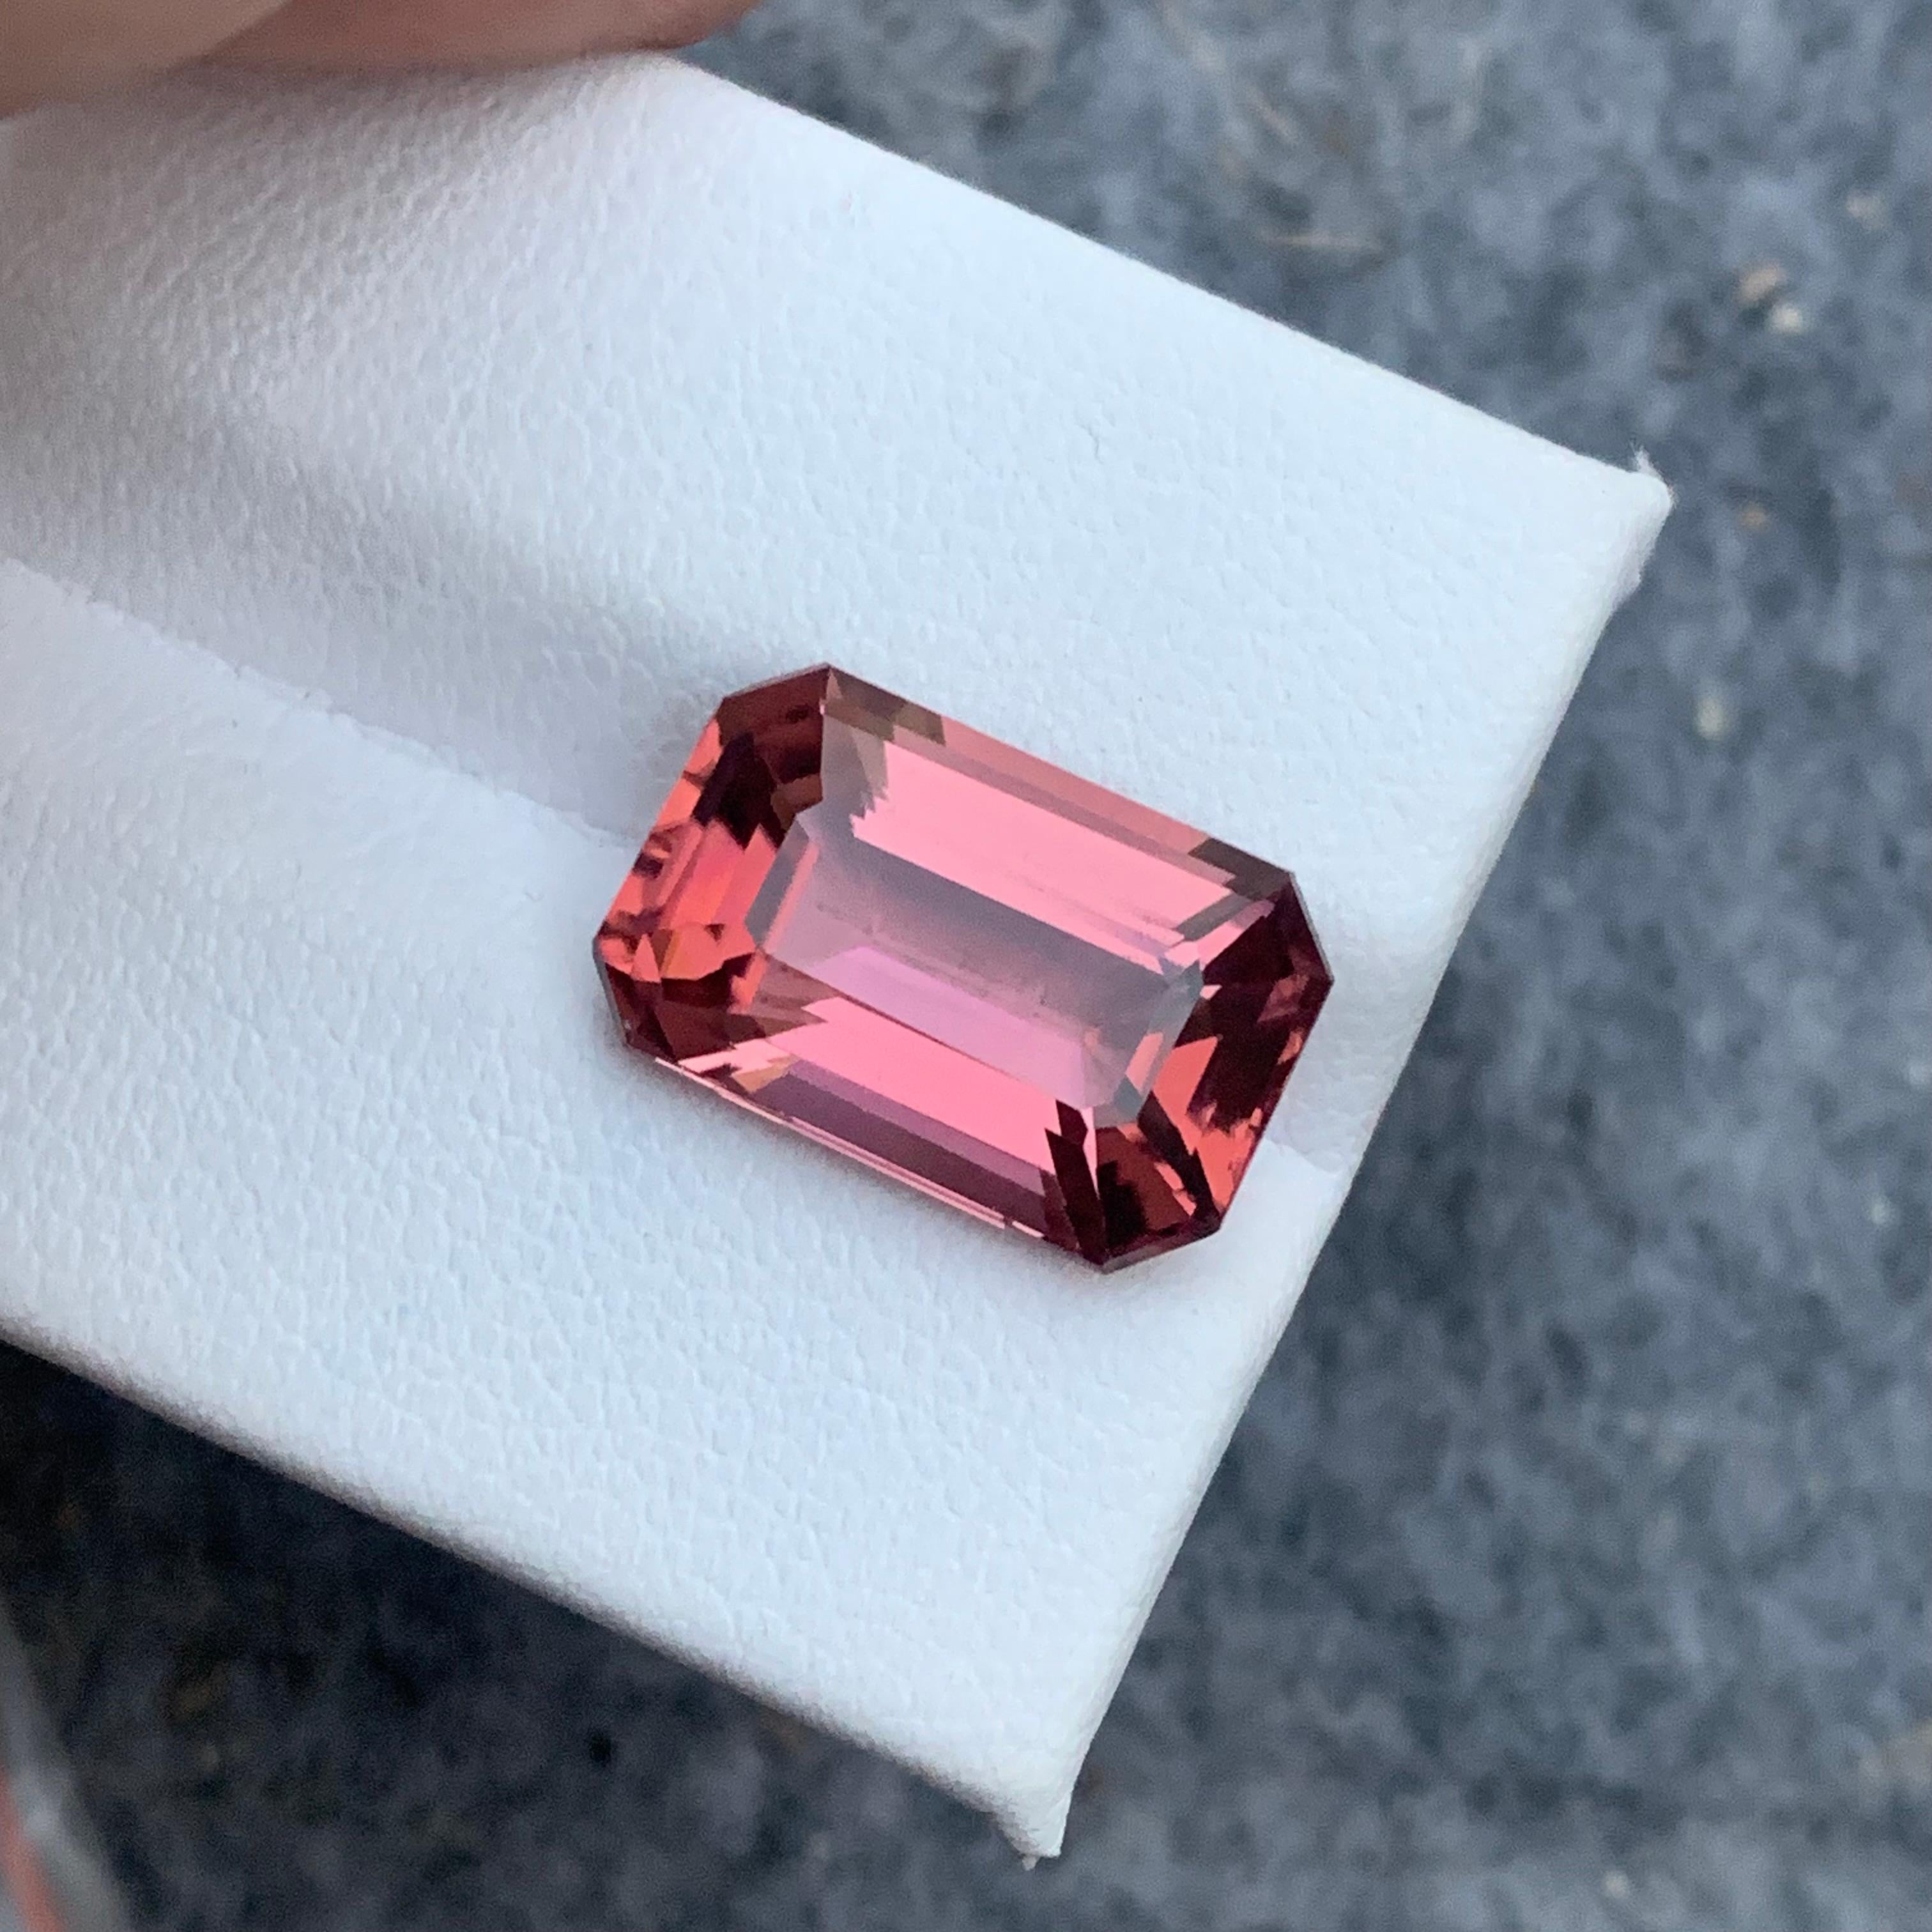 Arts and Crafts 9.0 Carat AAA Quality Loose Soft Pink Tourmaline Emerald Cut From Afghanistan